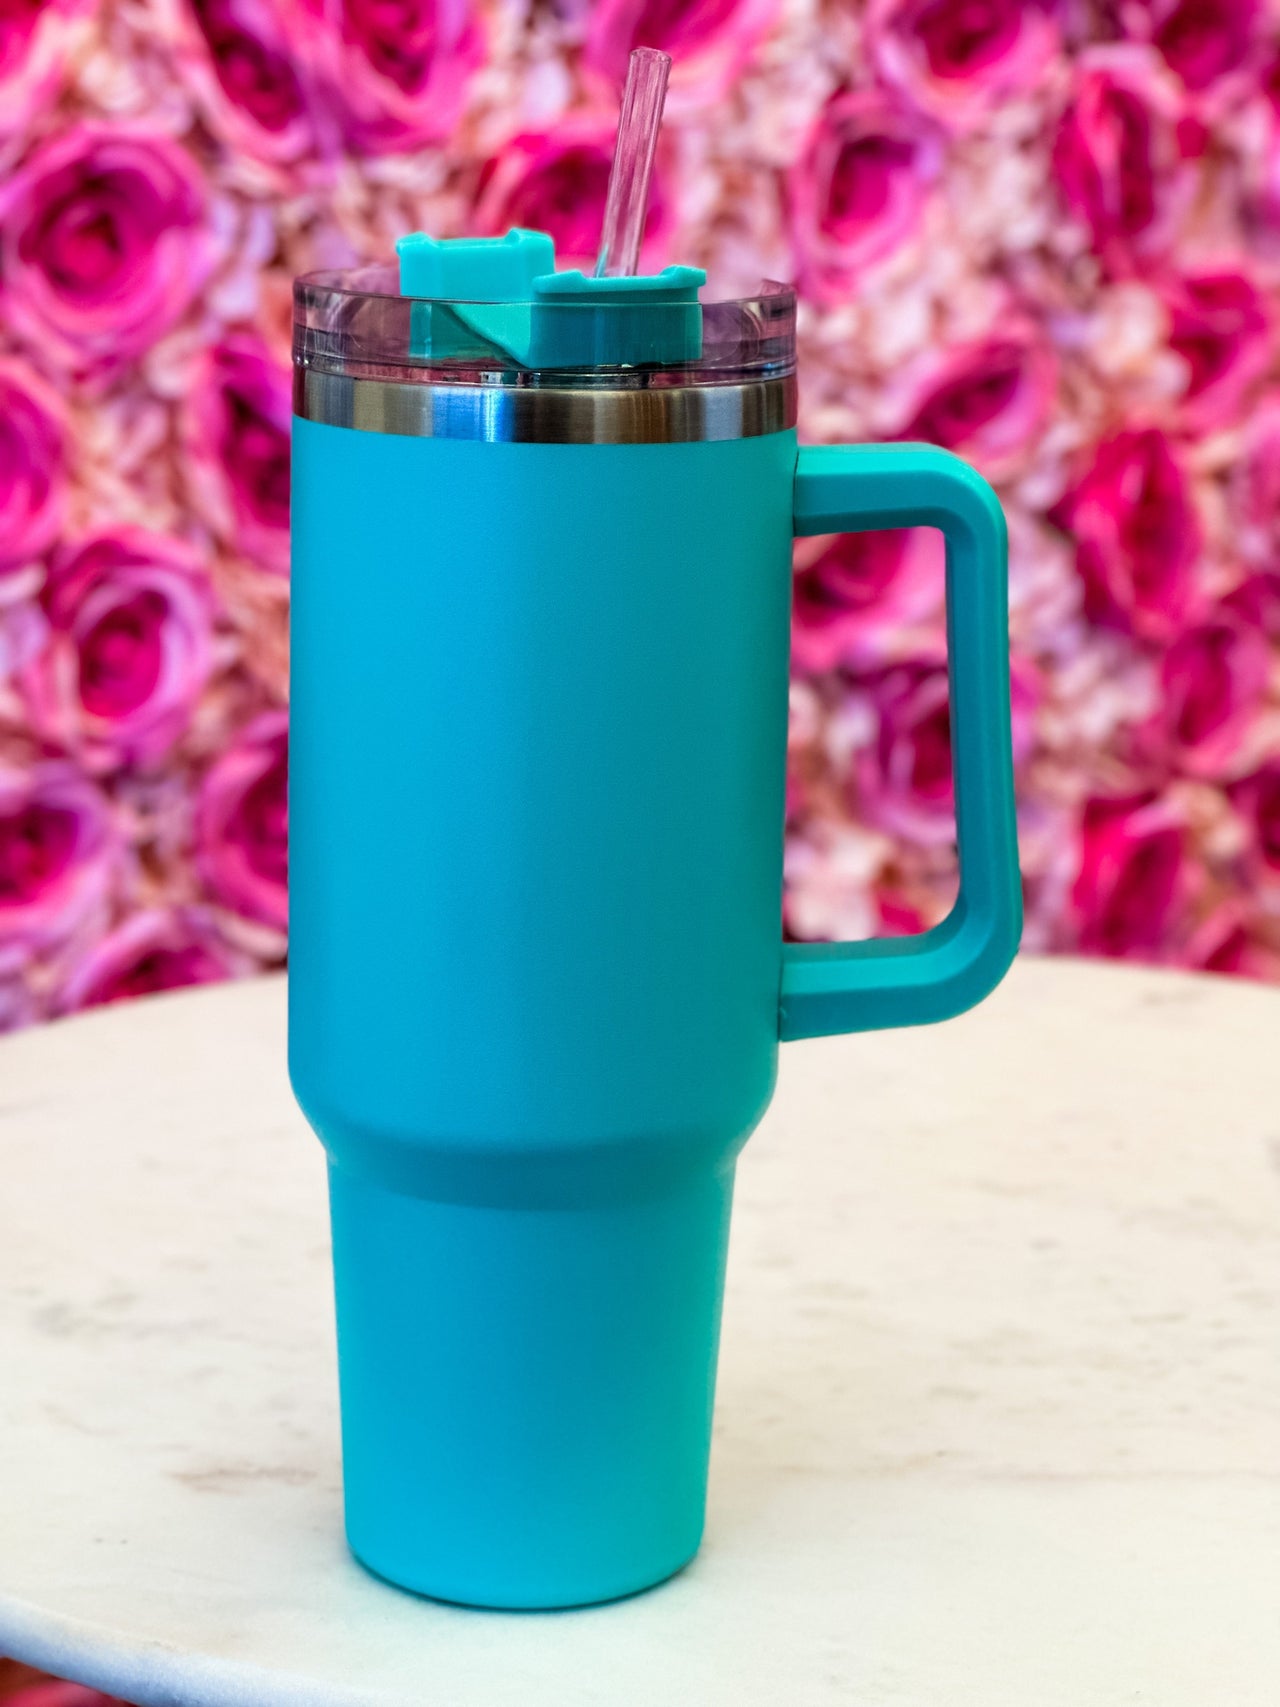 Teal blue 40oz stainless steel tumbler. 